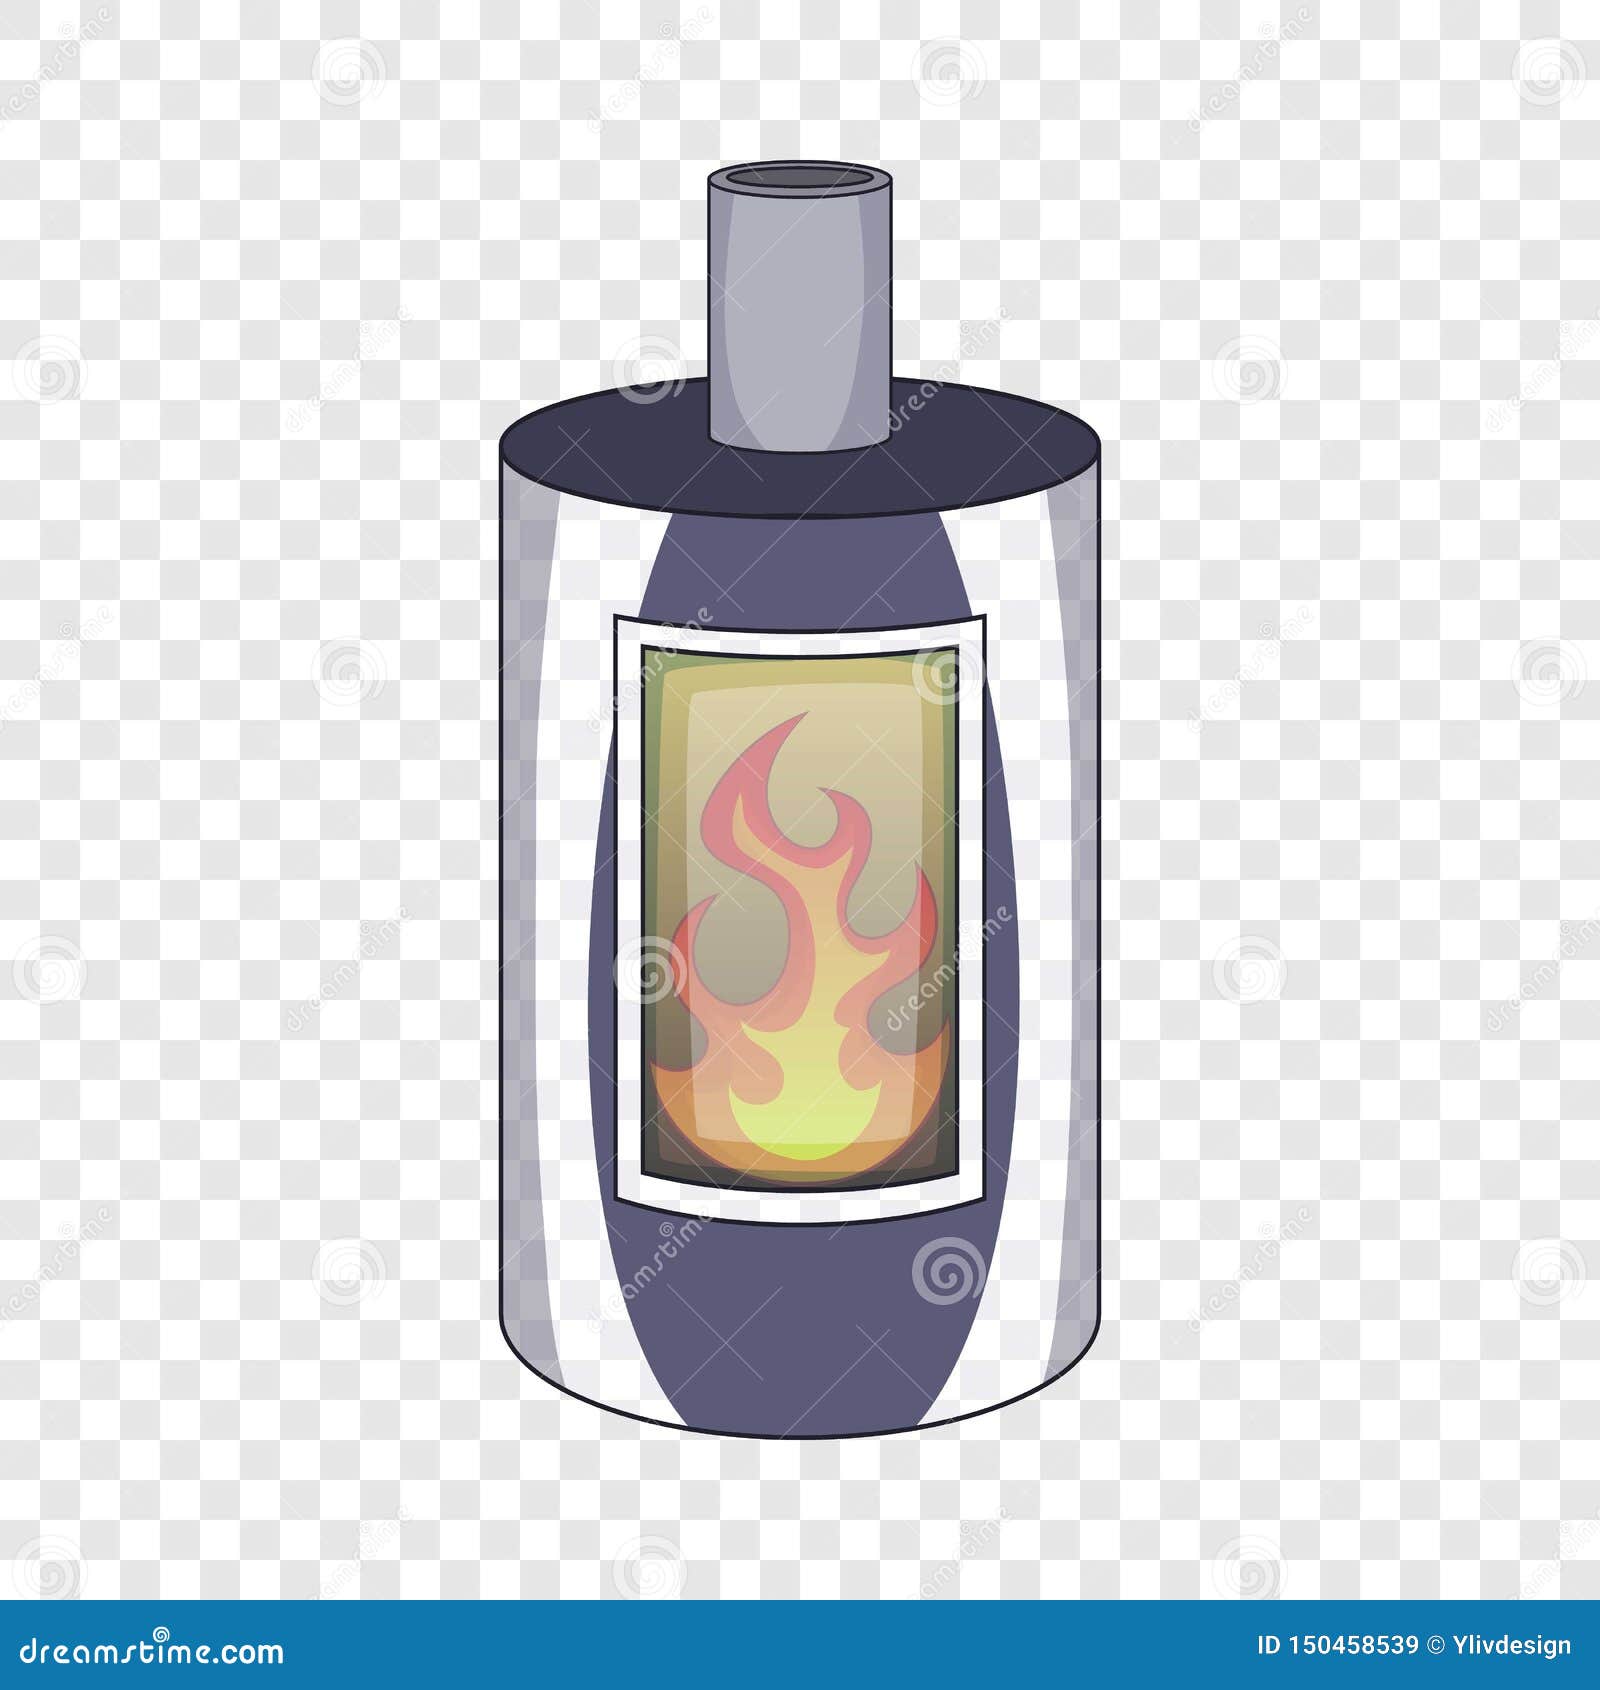 Oven stove icon, cartoon style. Oven stove icon. Cartoon illustration of oven stove vector icon for web